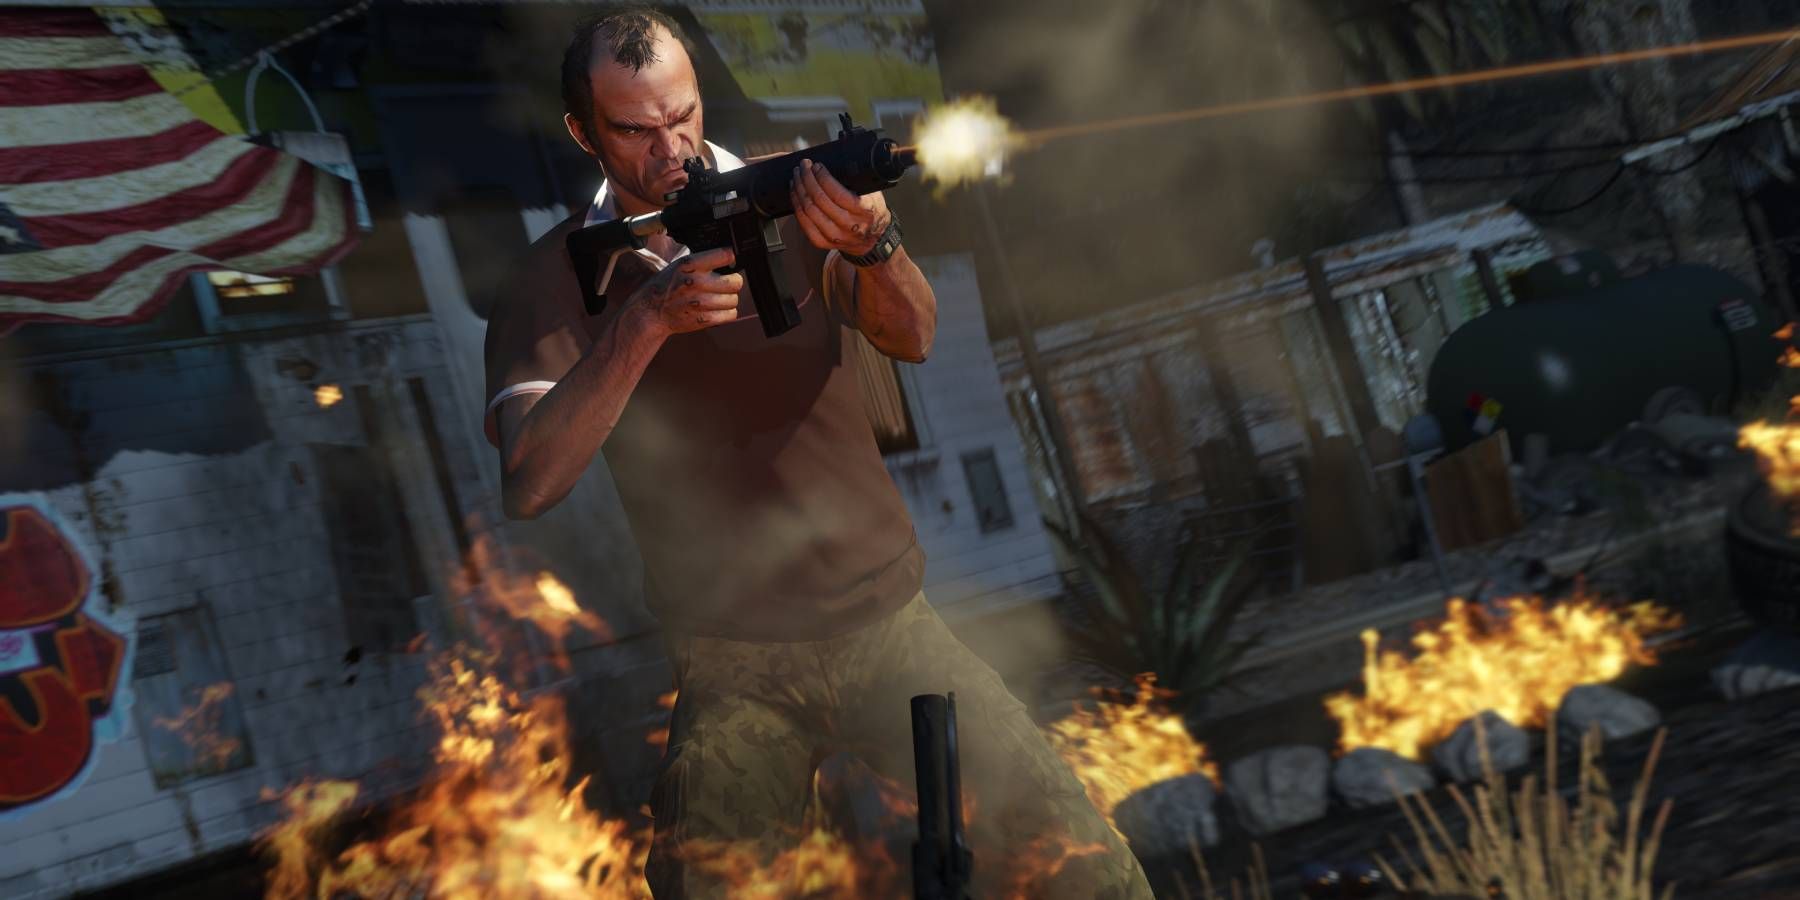 Trevor from Grand Theft Auto 5 firing a rifle while surrounded by fire